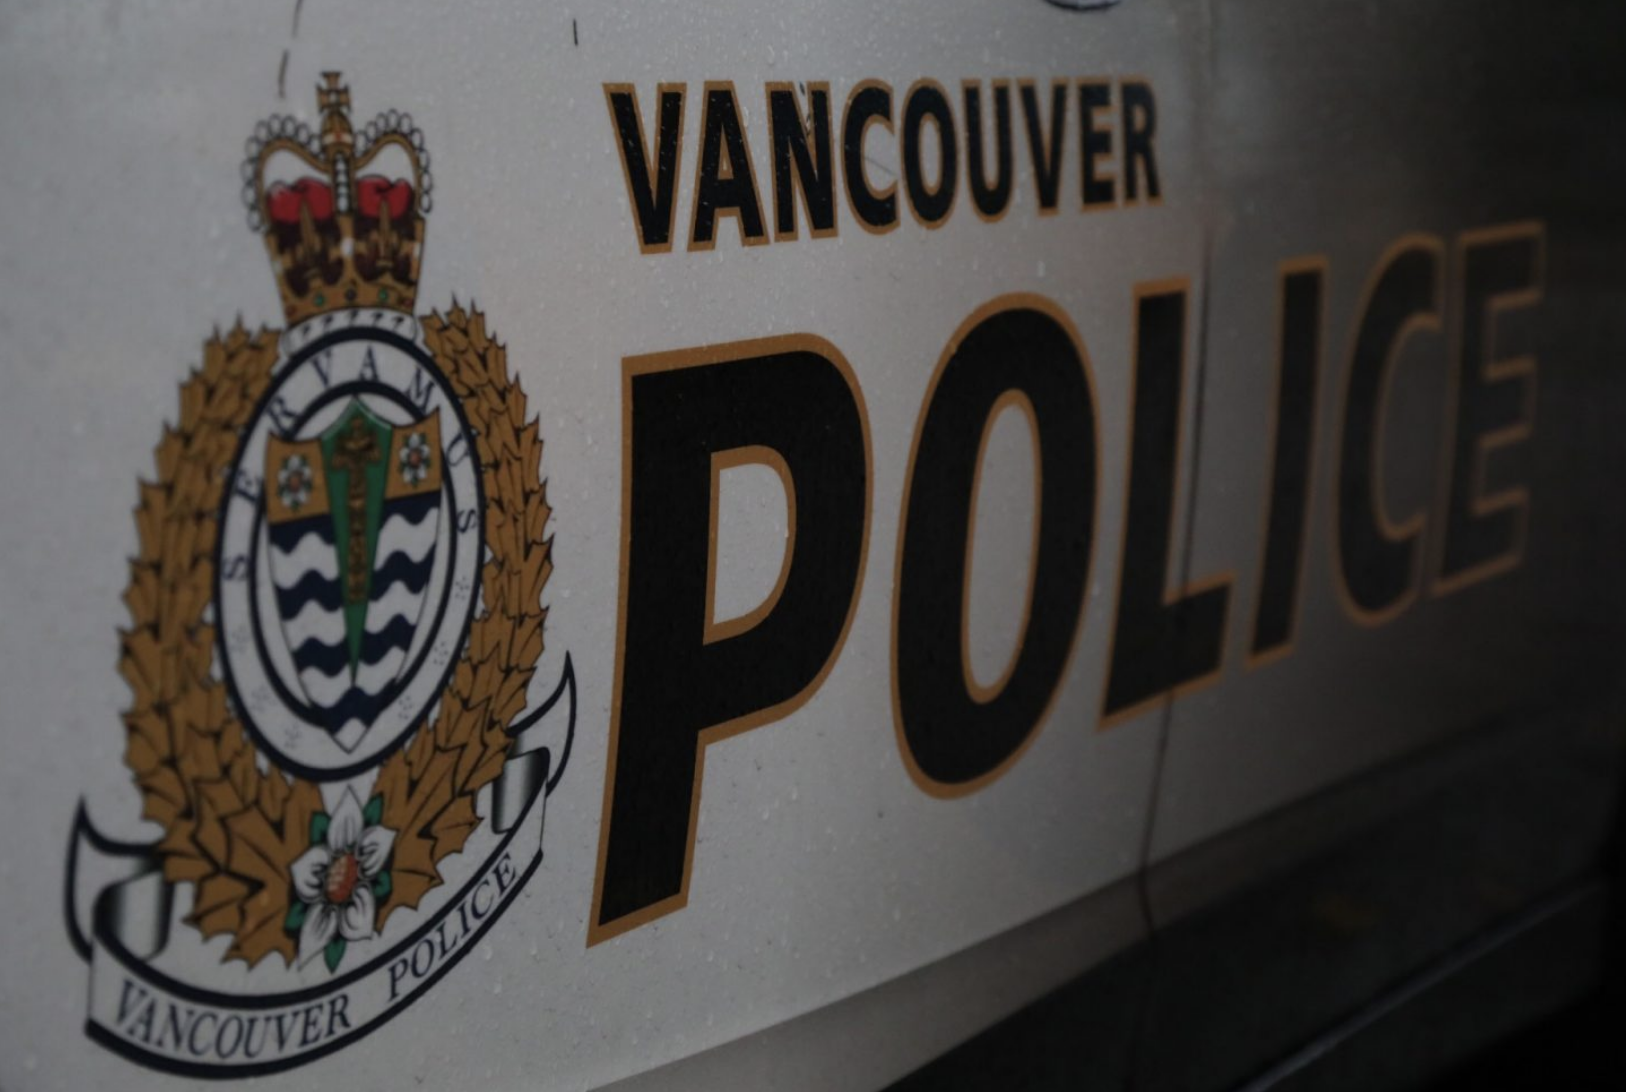 65 sudden heat related deaths in Vancouver since friday says VPD